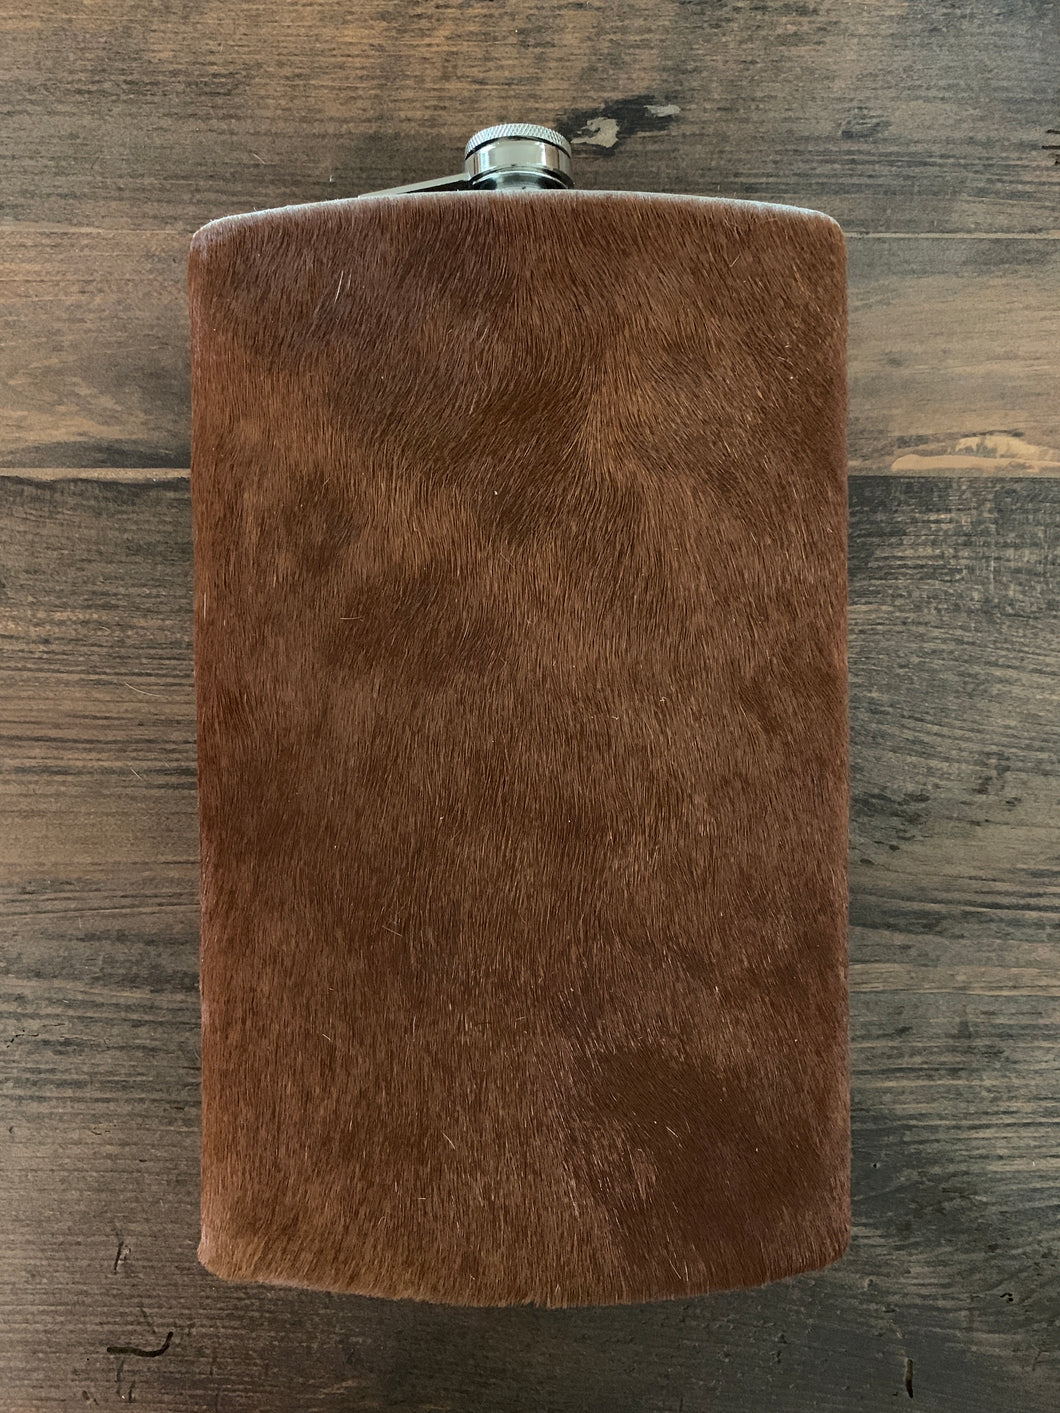 Flask, Texas Size Half Gallon Stainless Steel Flask wrapped in Cowhide